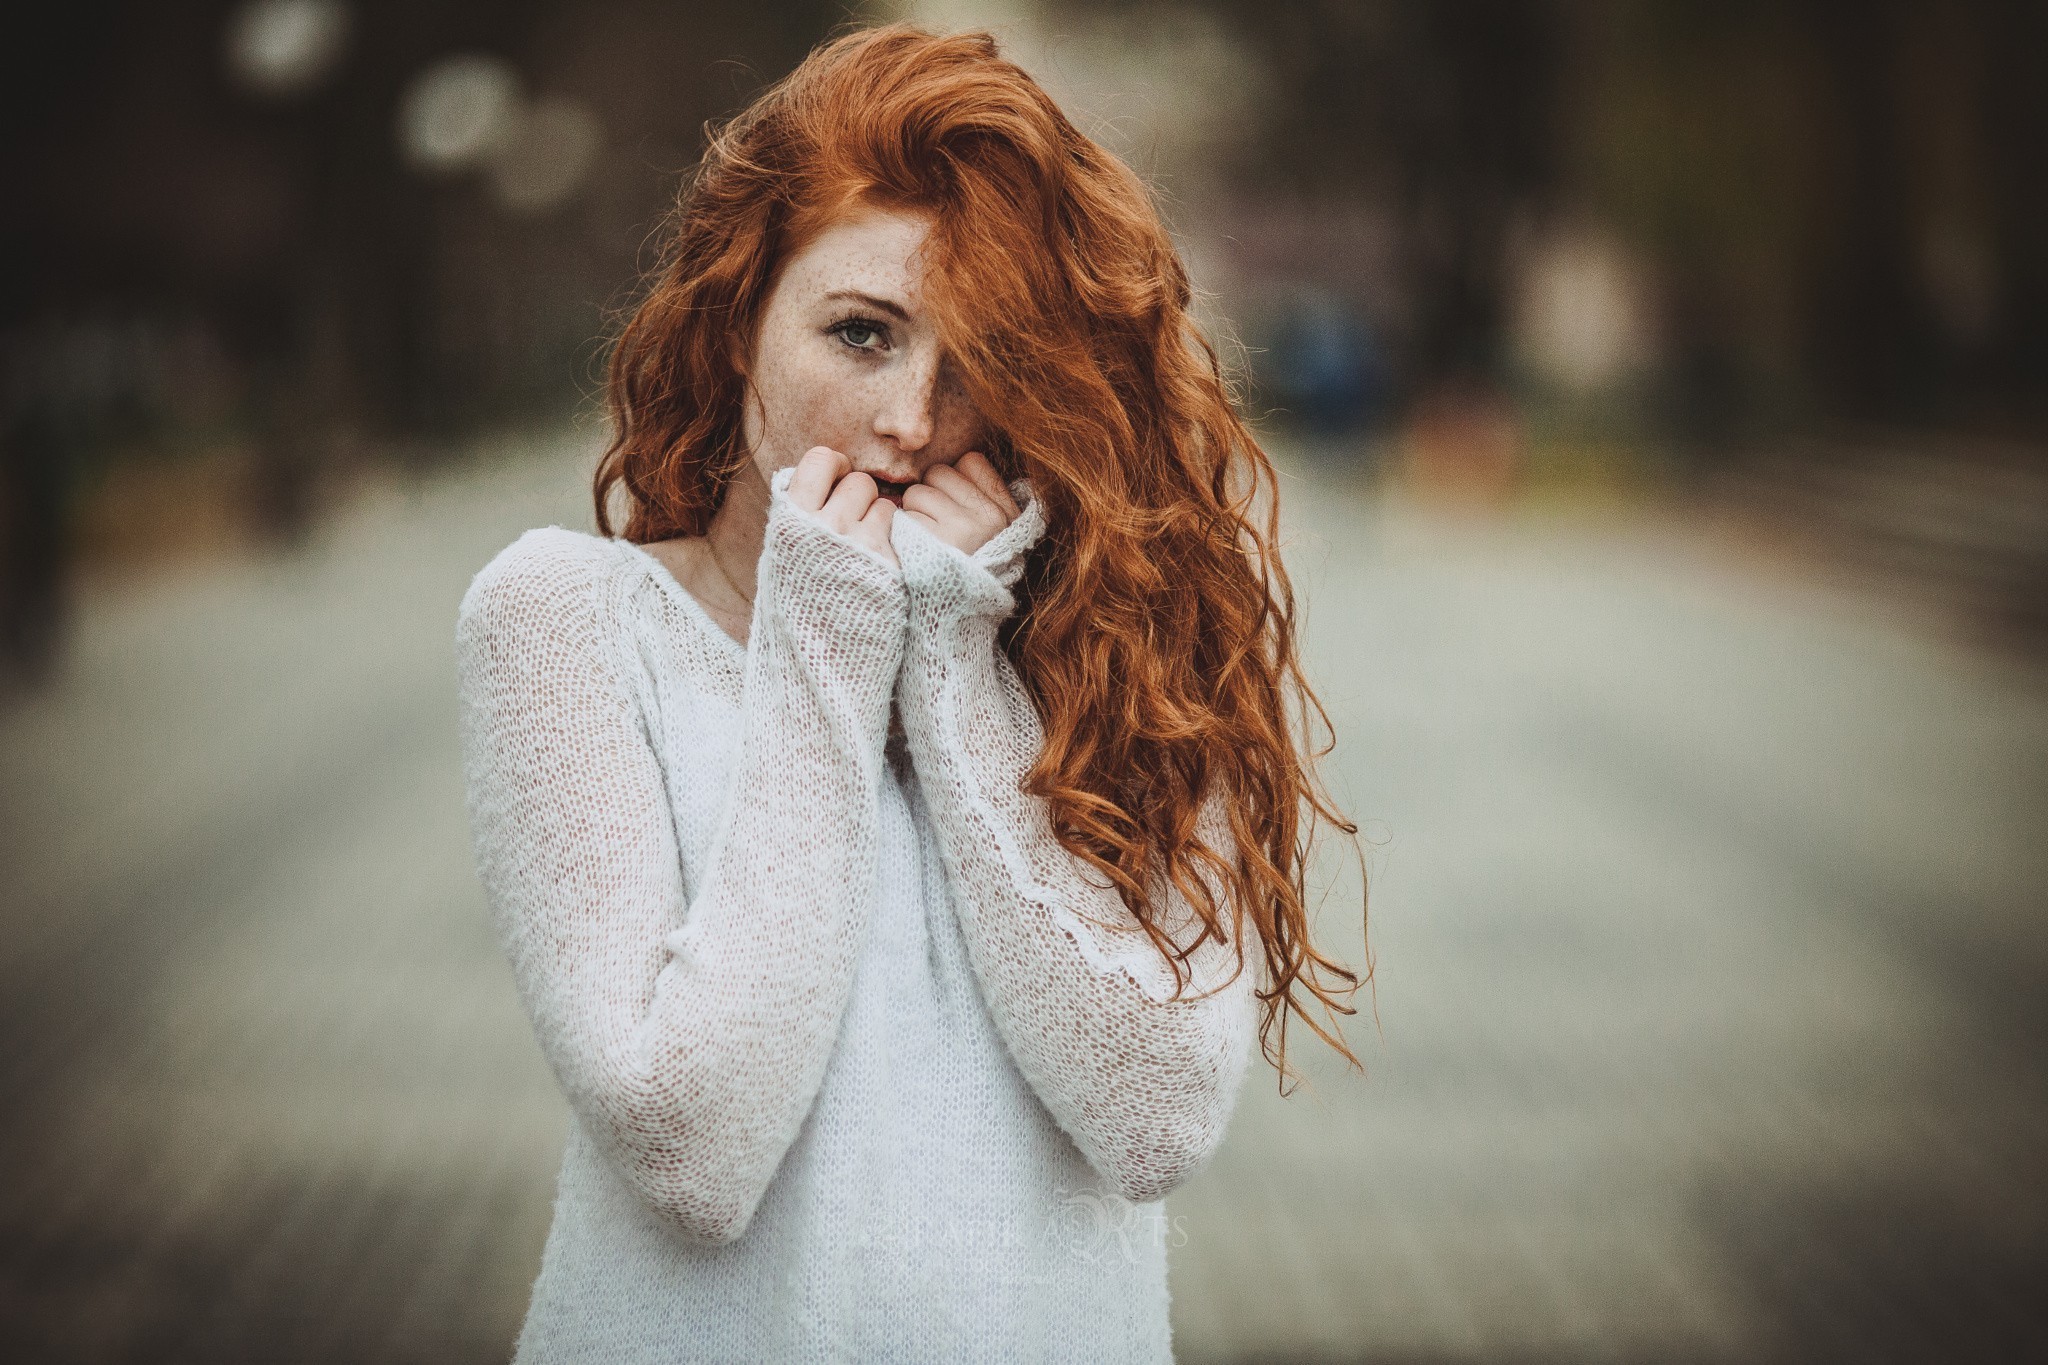 women, Redhead, Freckles, Long Hair, Curly Hair, Hair In Face, Looking At Viewer, White Sweater Wallpaper